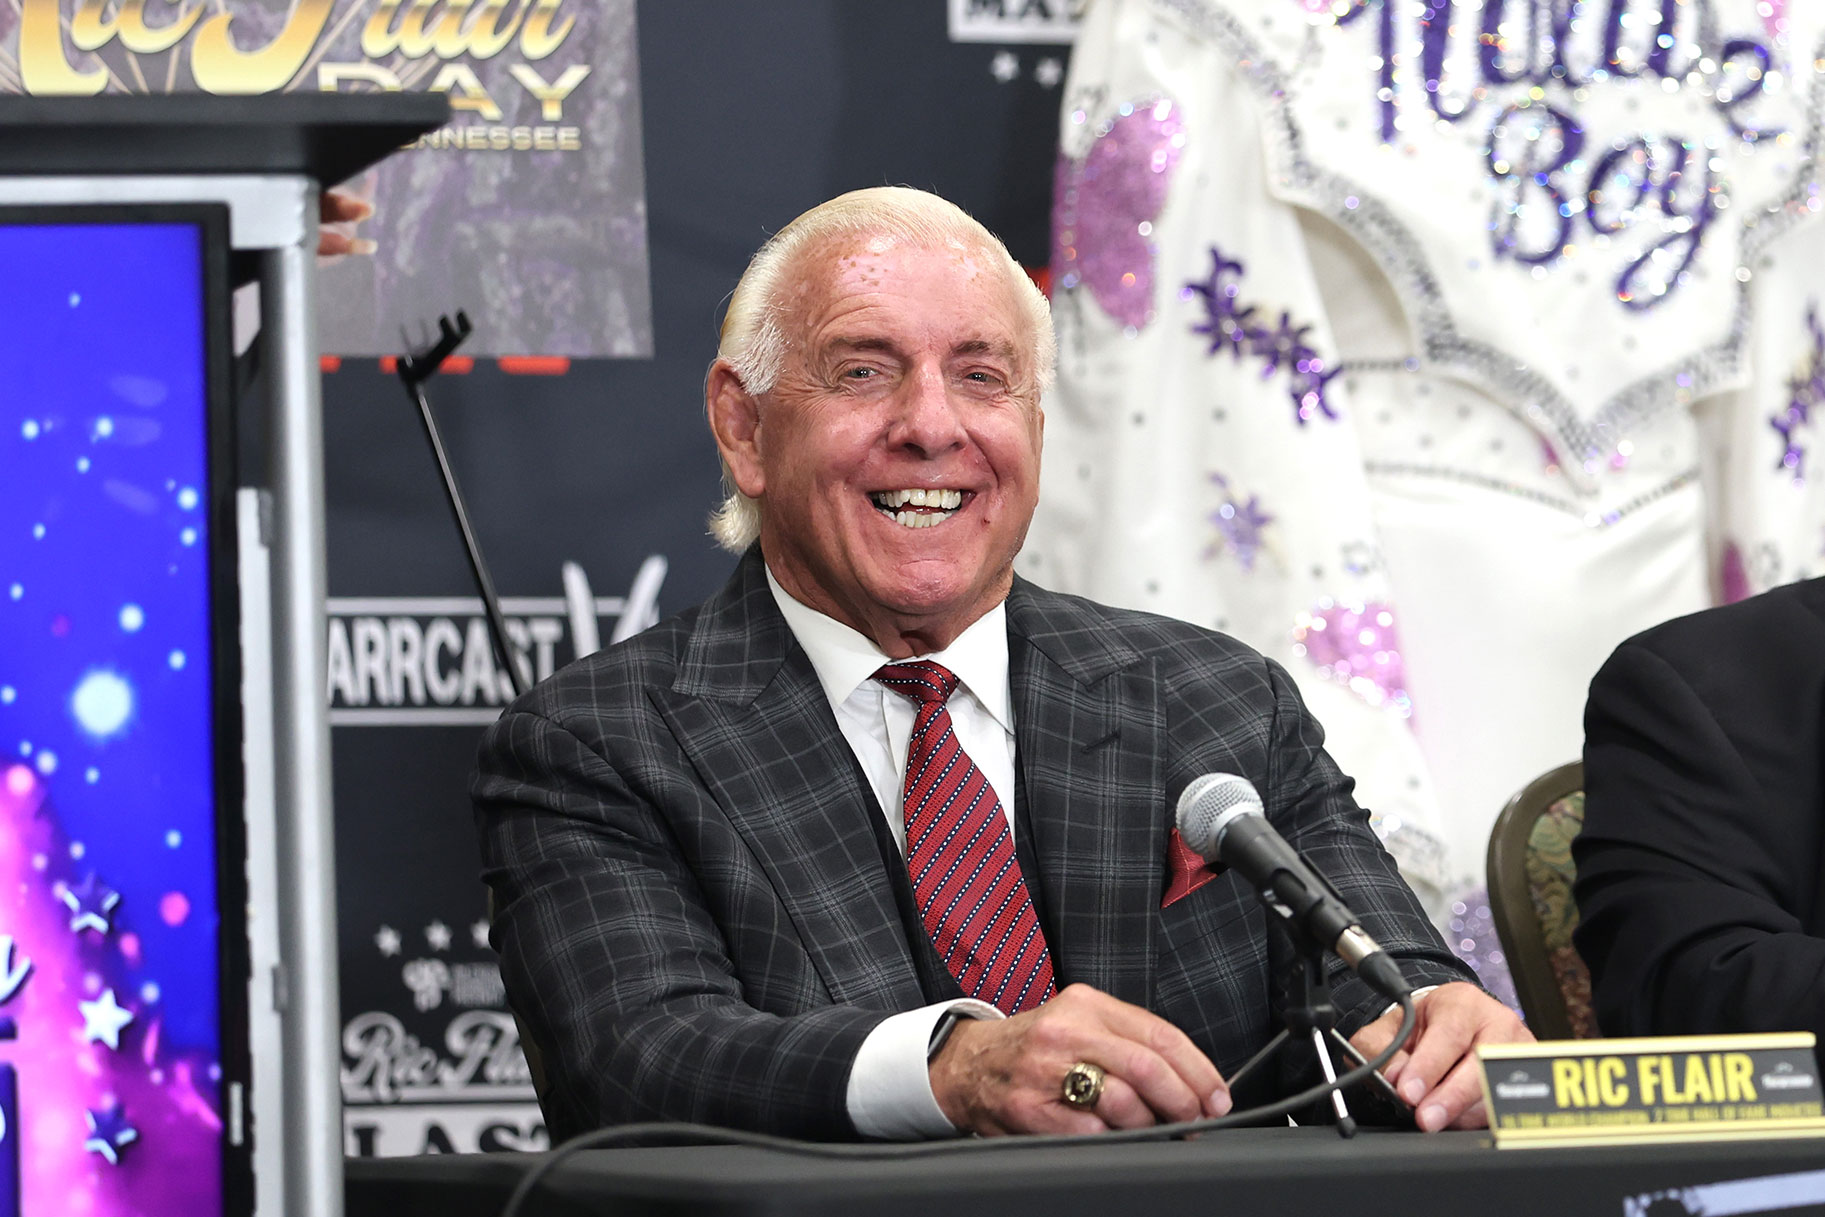 American wrestler Ric Flair attends a press conference where July 31rst is declared “Ric Flair Day” in Music City at Nashville Fairgrounds